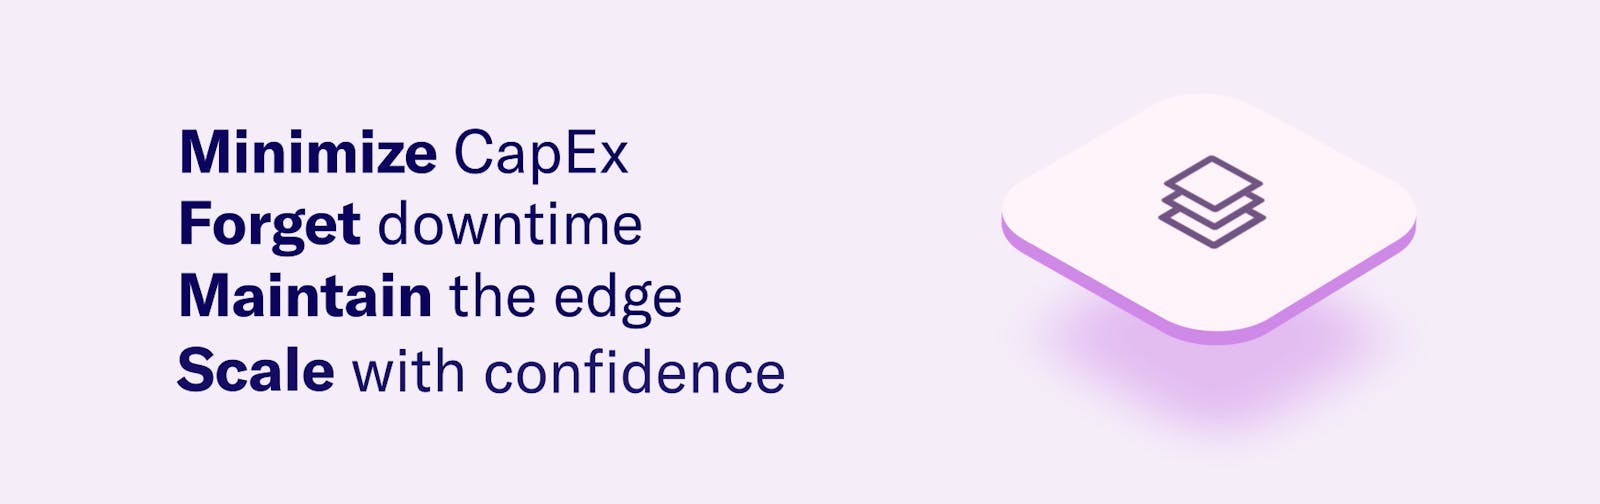 minimize capex, forget downtime, maintain the edge, scale with confidence